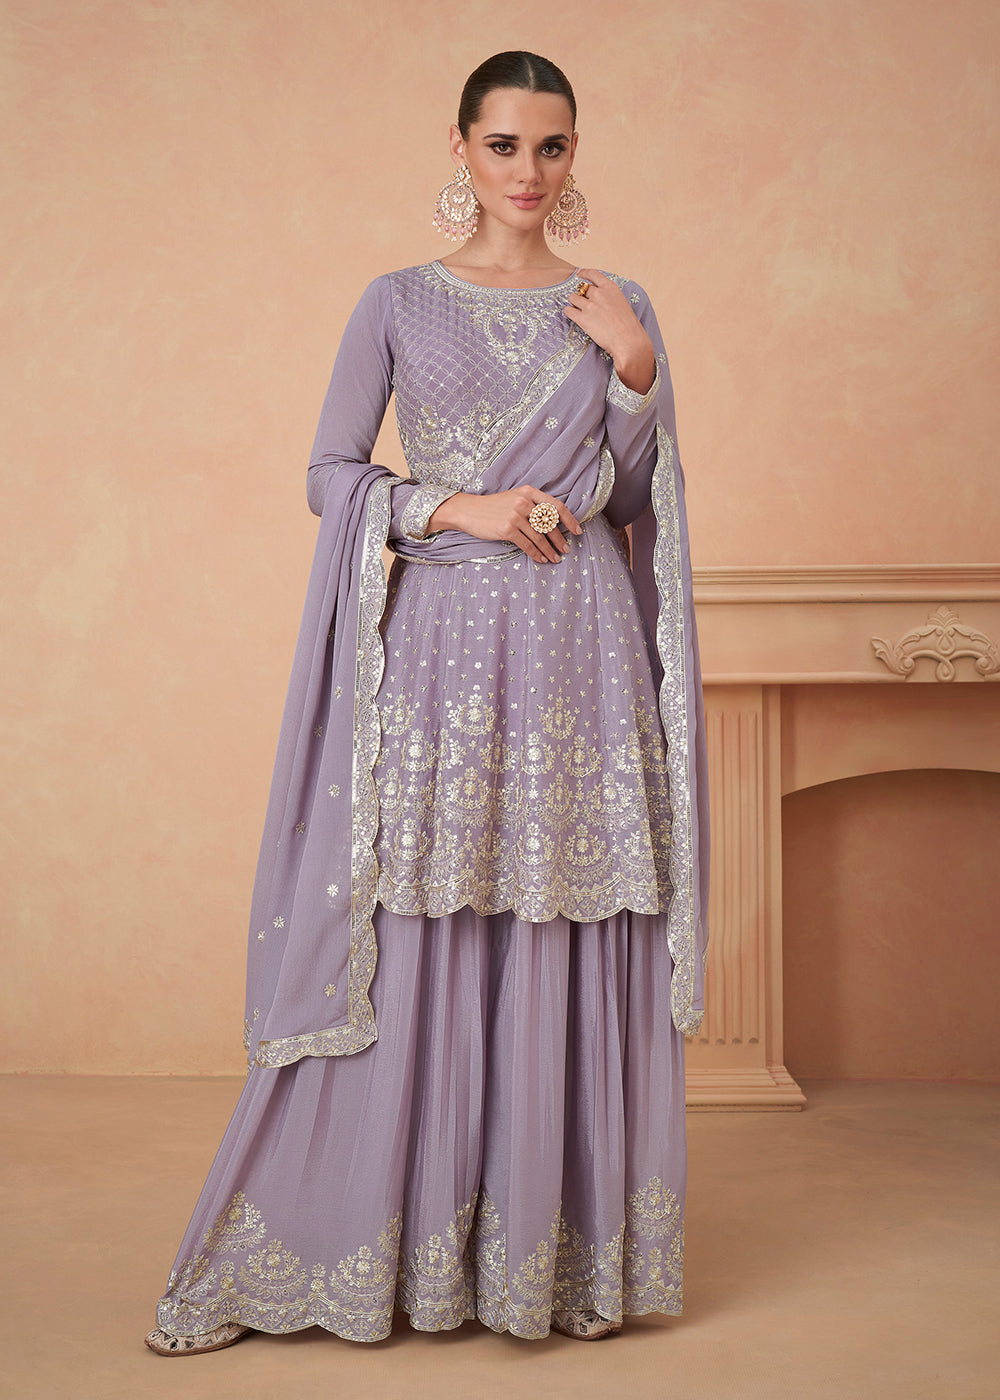 Buy Now Premium Chinnon Lavender Embroidered Wedding Palazzo Suit Online in USA, UK, Canada, Germany, Australia & Worldwide at Empress Clothing.